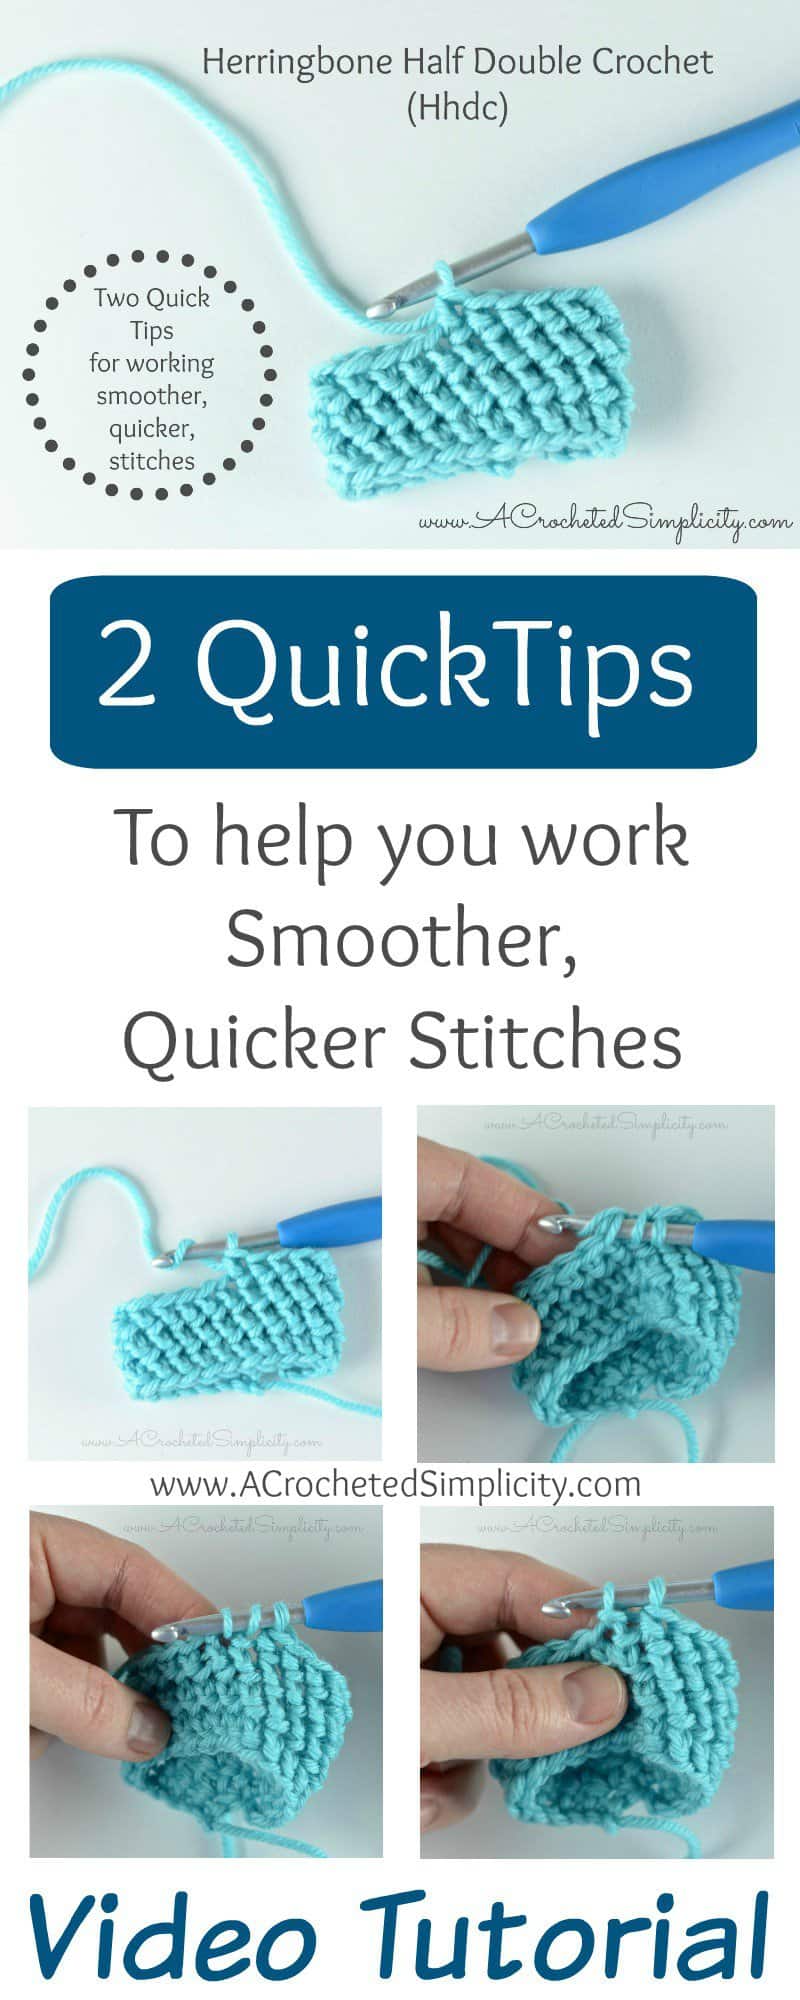 2 Quick Tips to working Frustration Free Herringbone Stitches! A quick crochet video tutorial by A Crocheted Simplicity #crochettutorial #crochet #herringbonecrochetstitch #crochetherringbonestitch #crochetvideotutorial